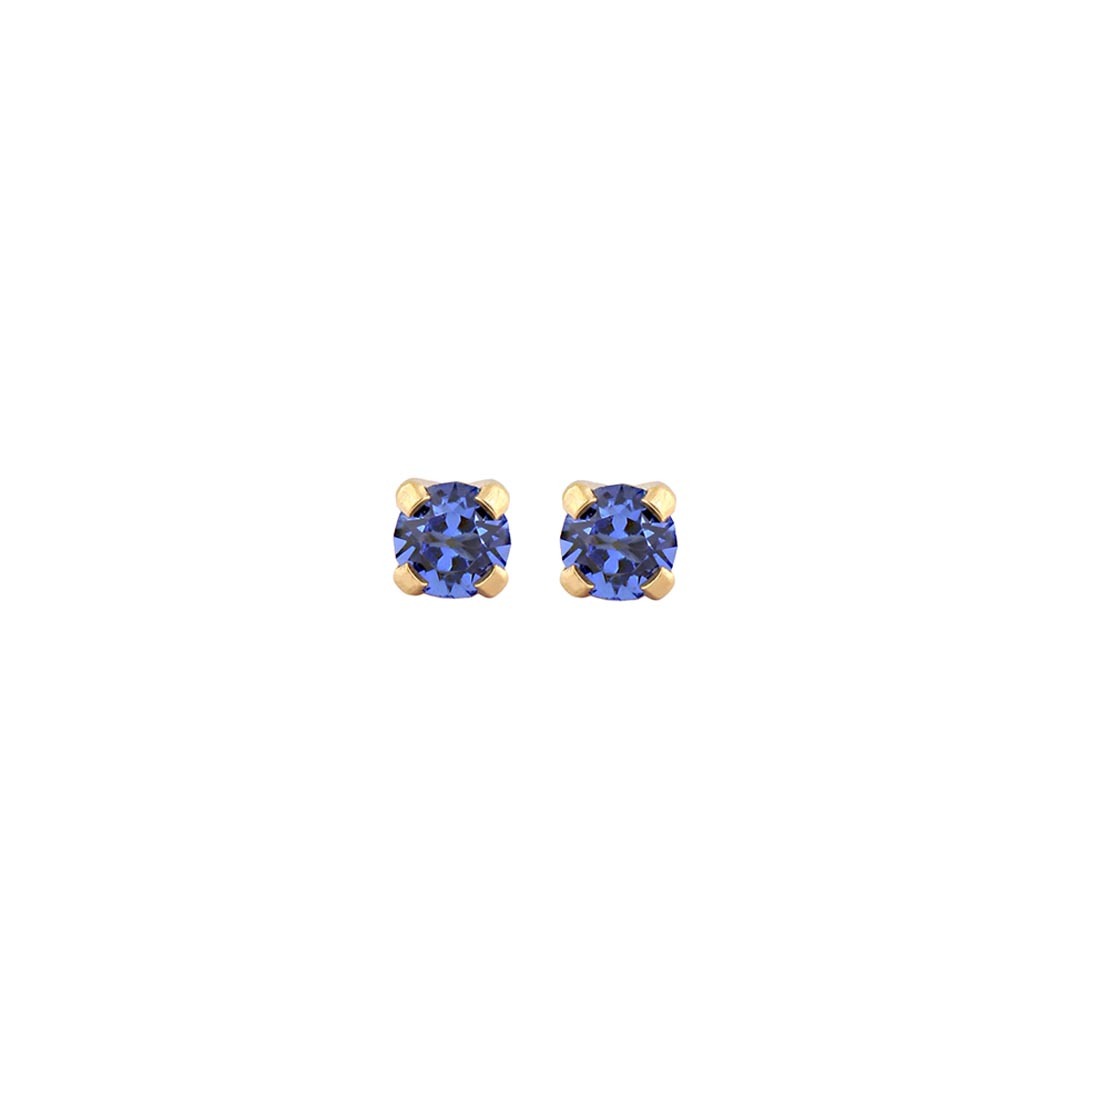 3MM - September Sapphire Birthstone (Round) - Blue | 24K Gold Plated Kids / Baby / Children’s Fashion Earrings | Studex Tiny Tips